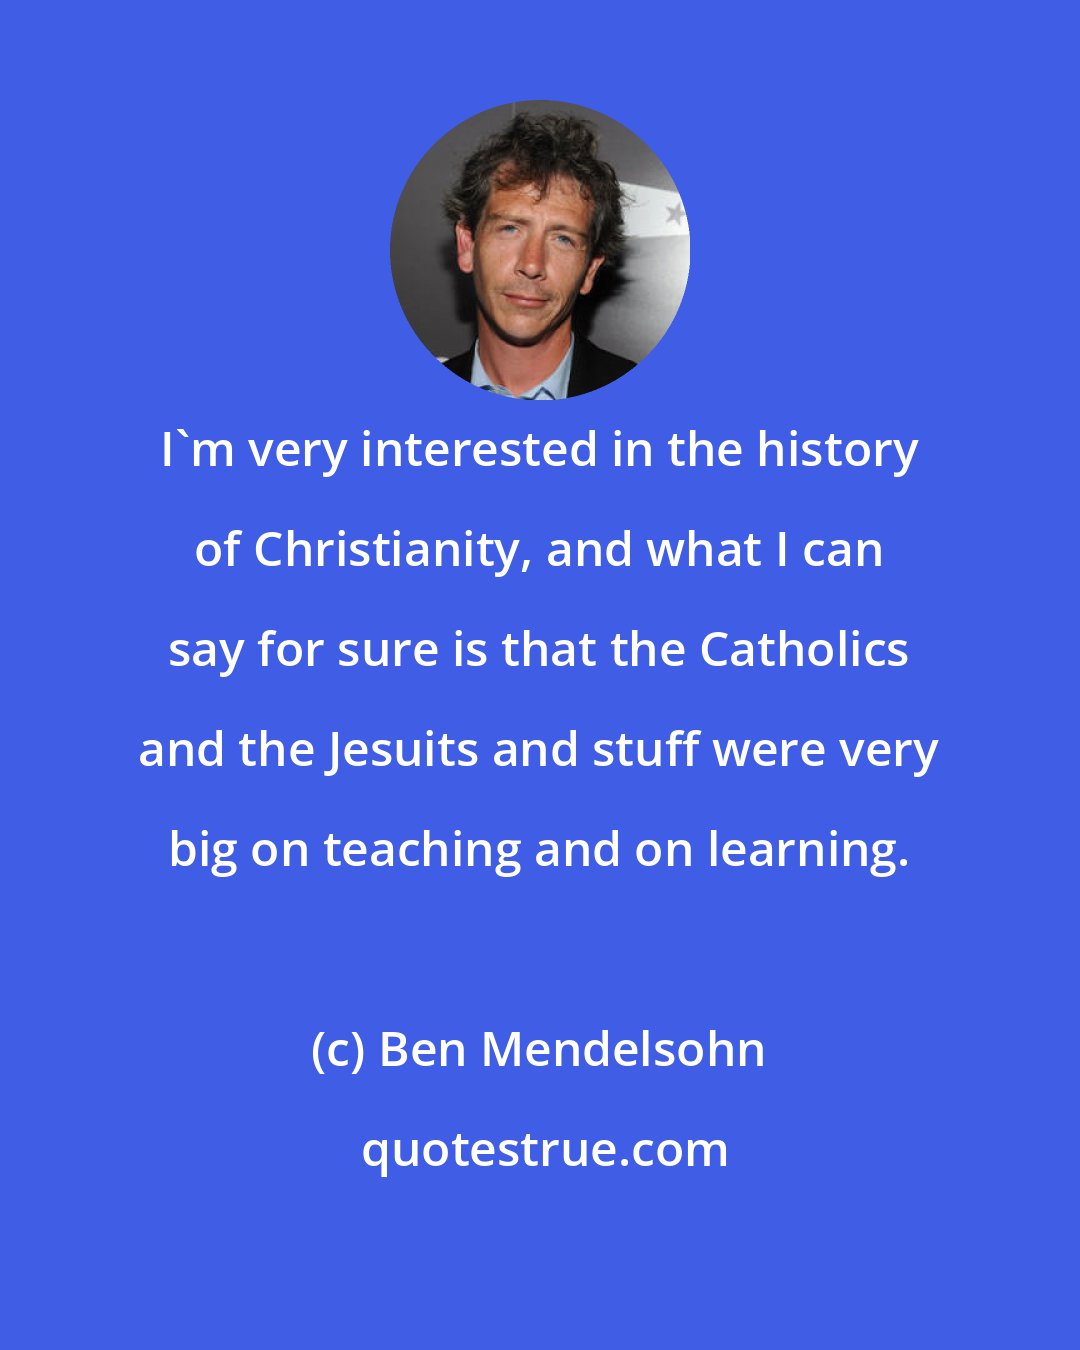 Ben Mendelsohn: I'm very interested in the history of Christianity, and what I can say for sure is that the Catholics and the Jesuits and stuff were very big on teaching and on learning.